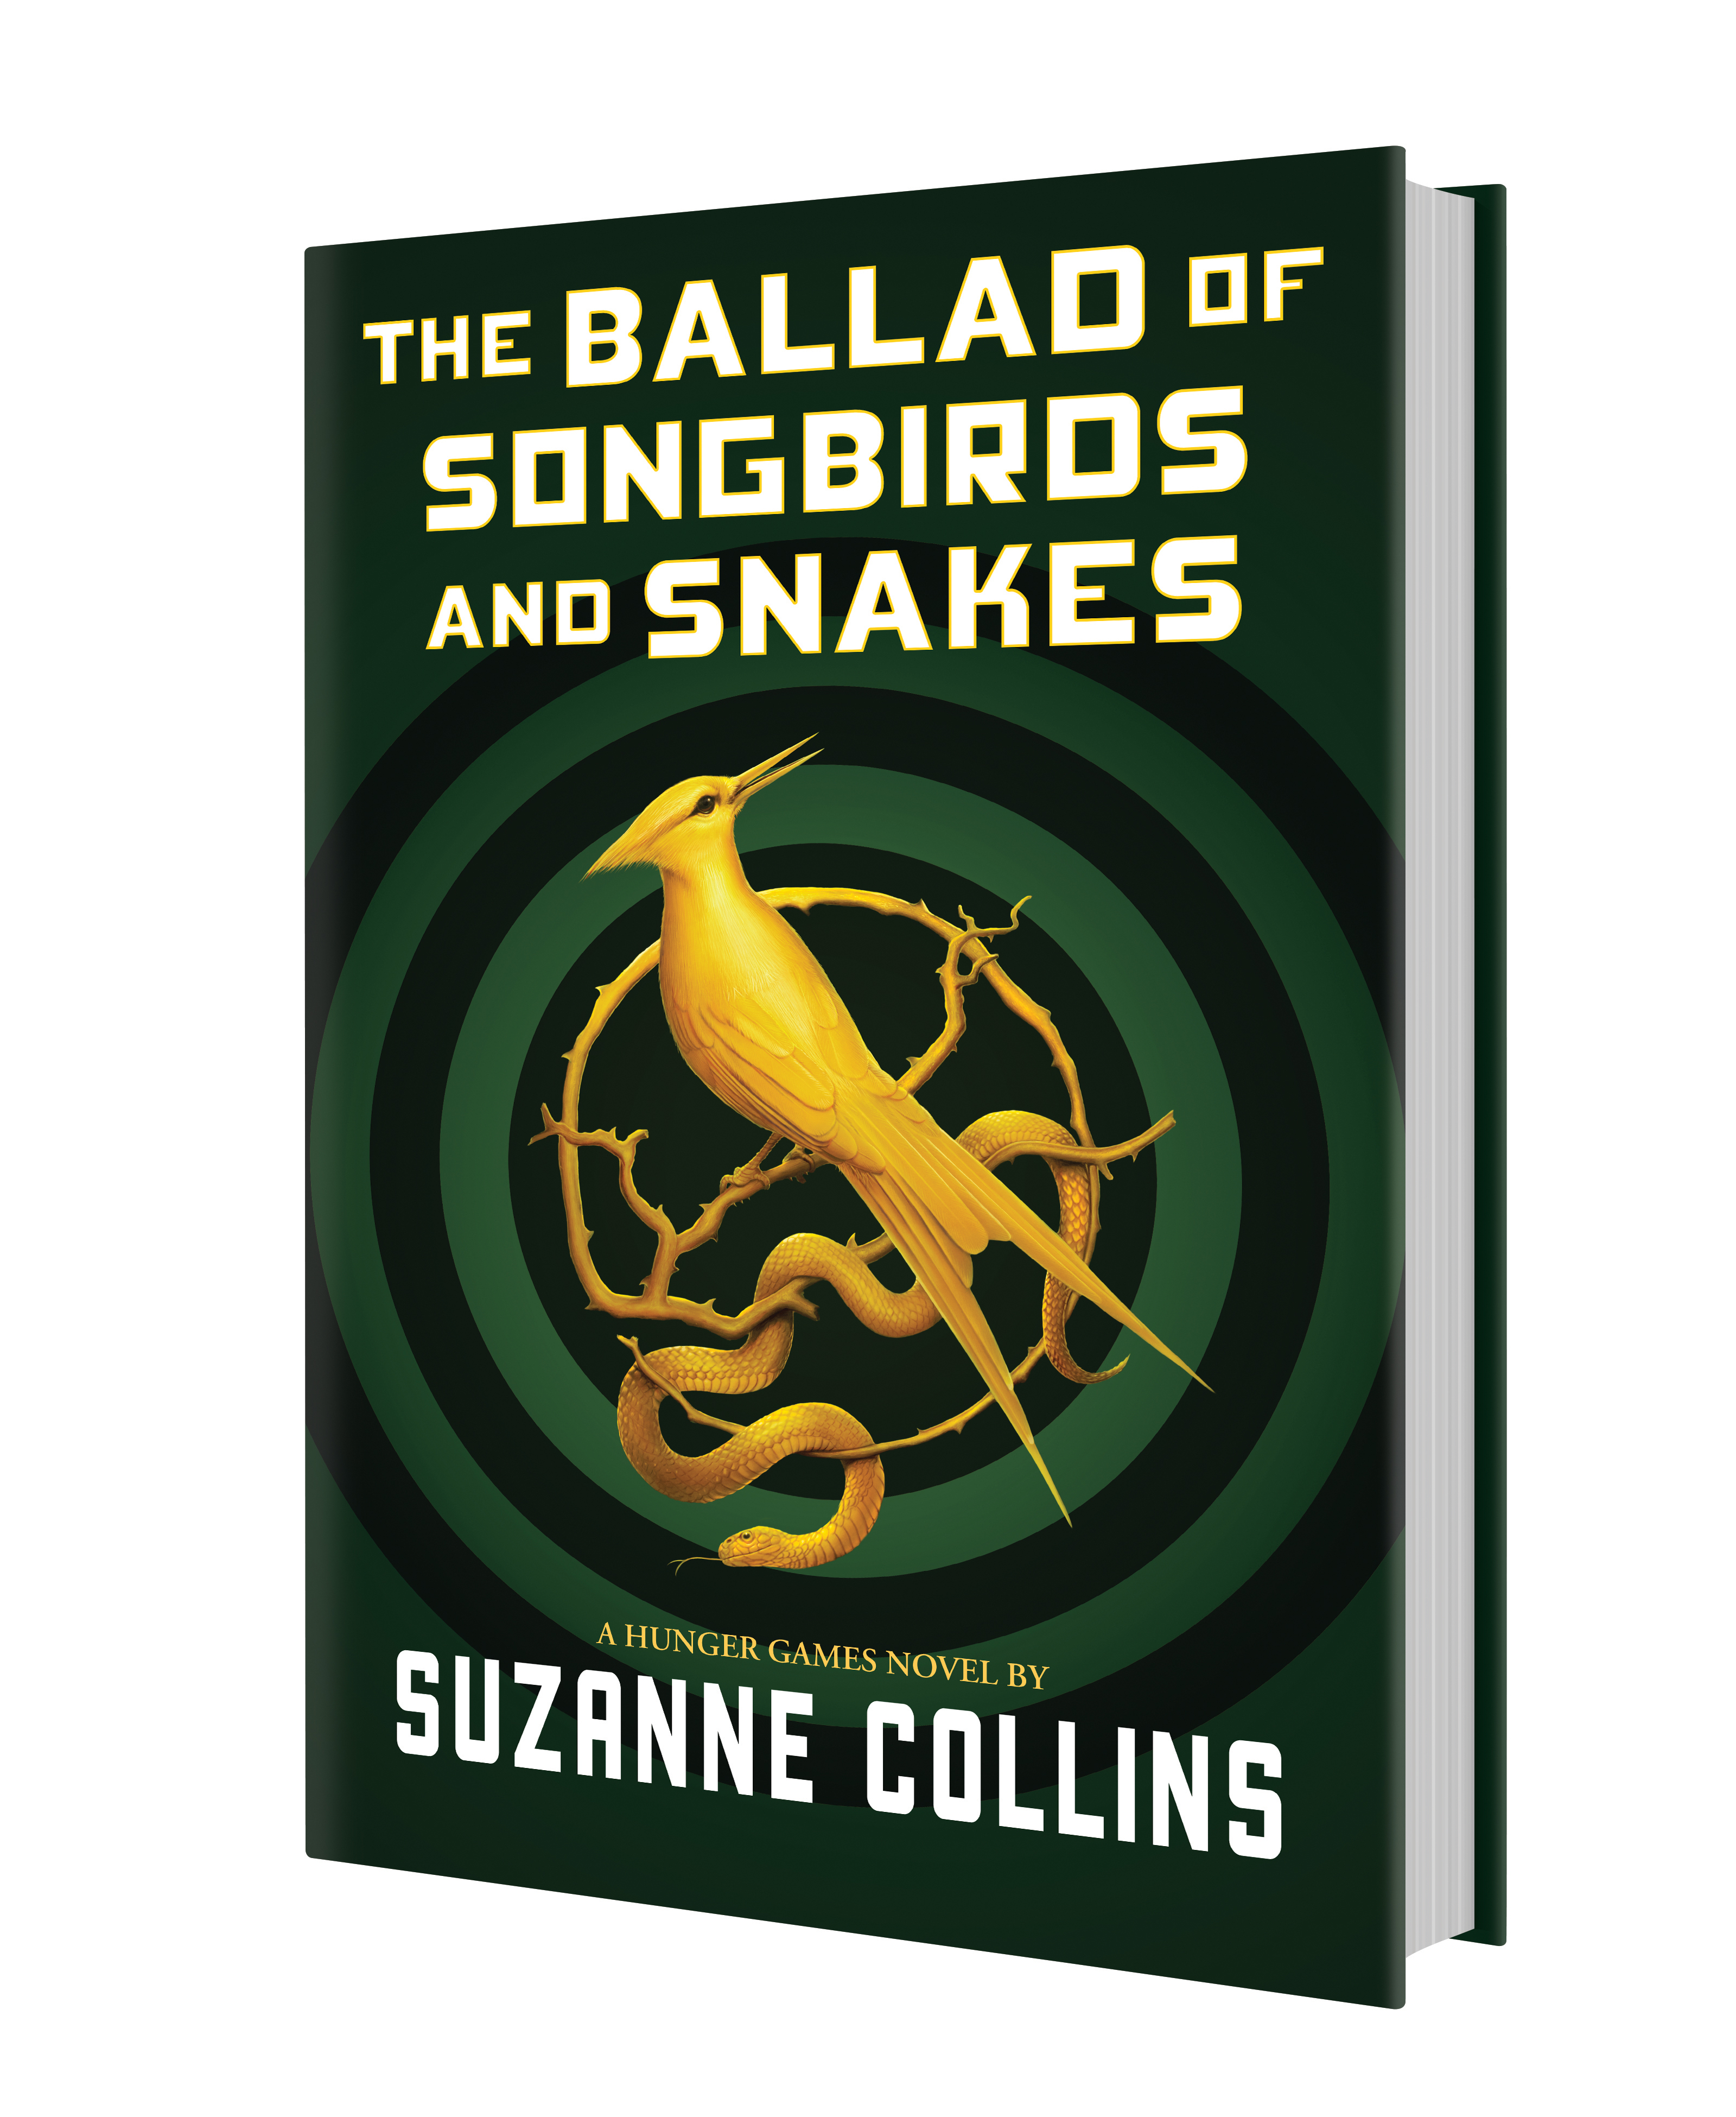 hunger games trilogy. suzanne collins: Suzanne Collins